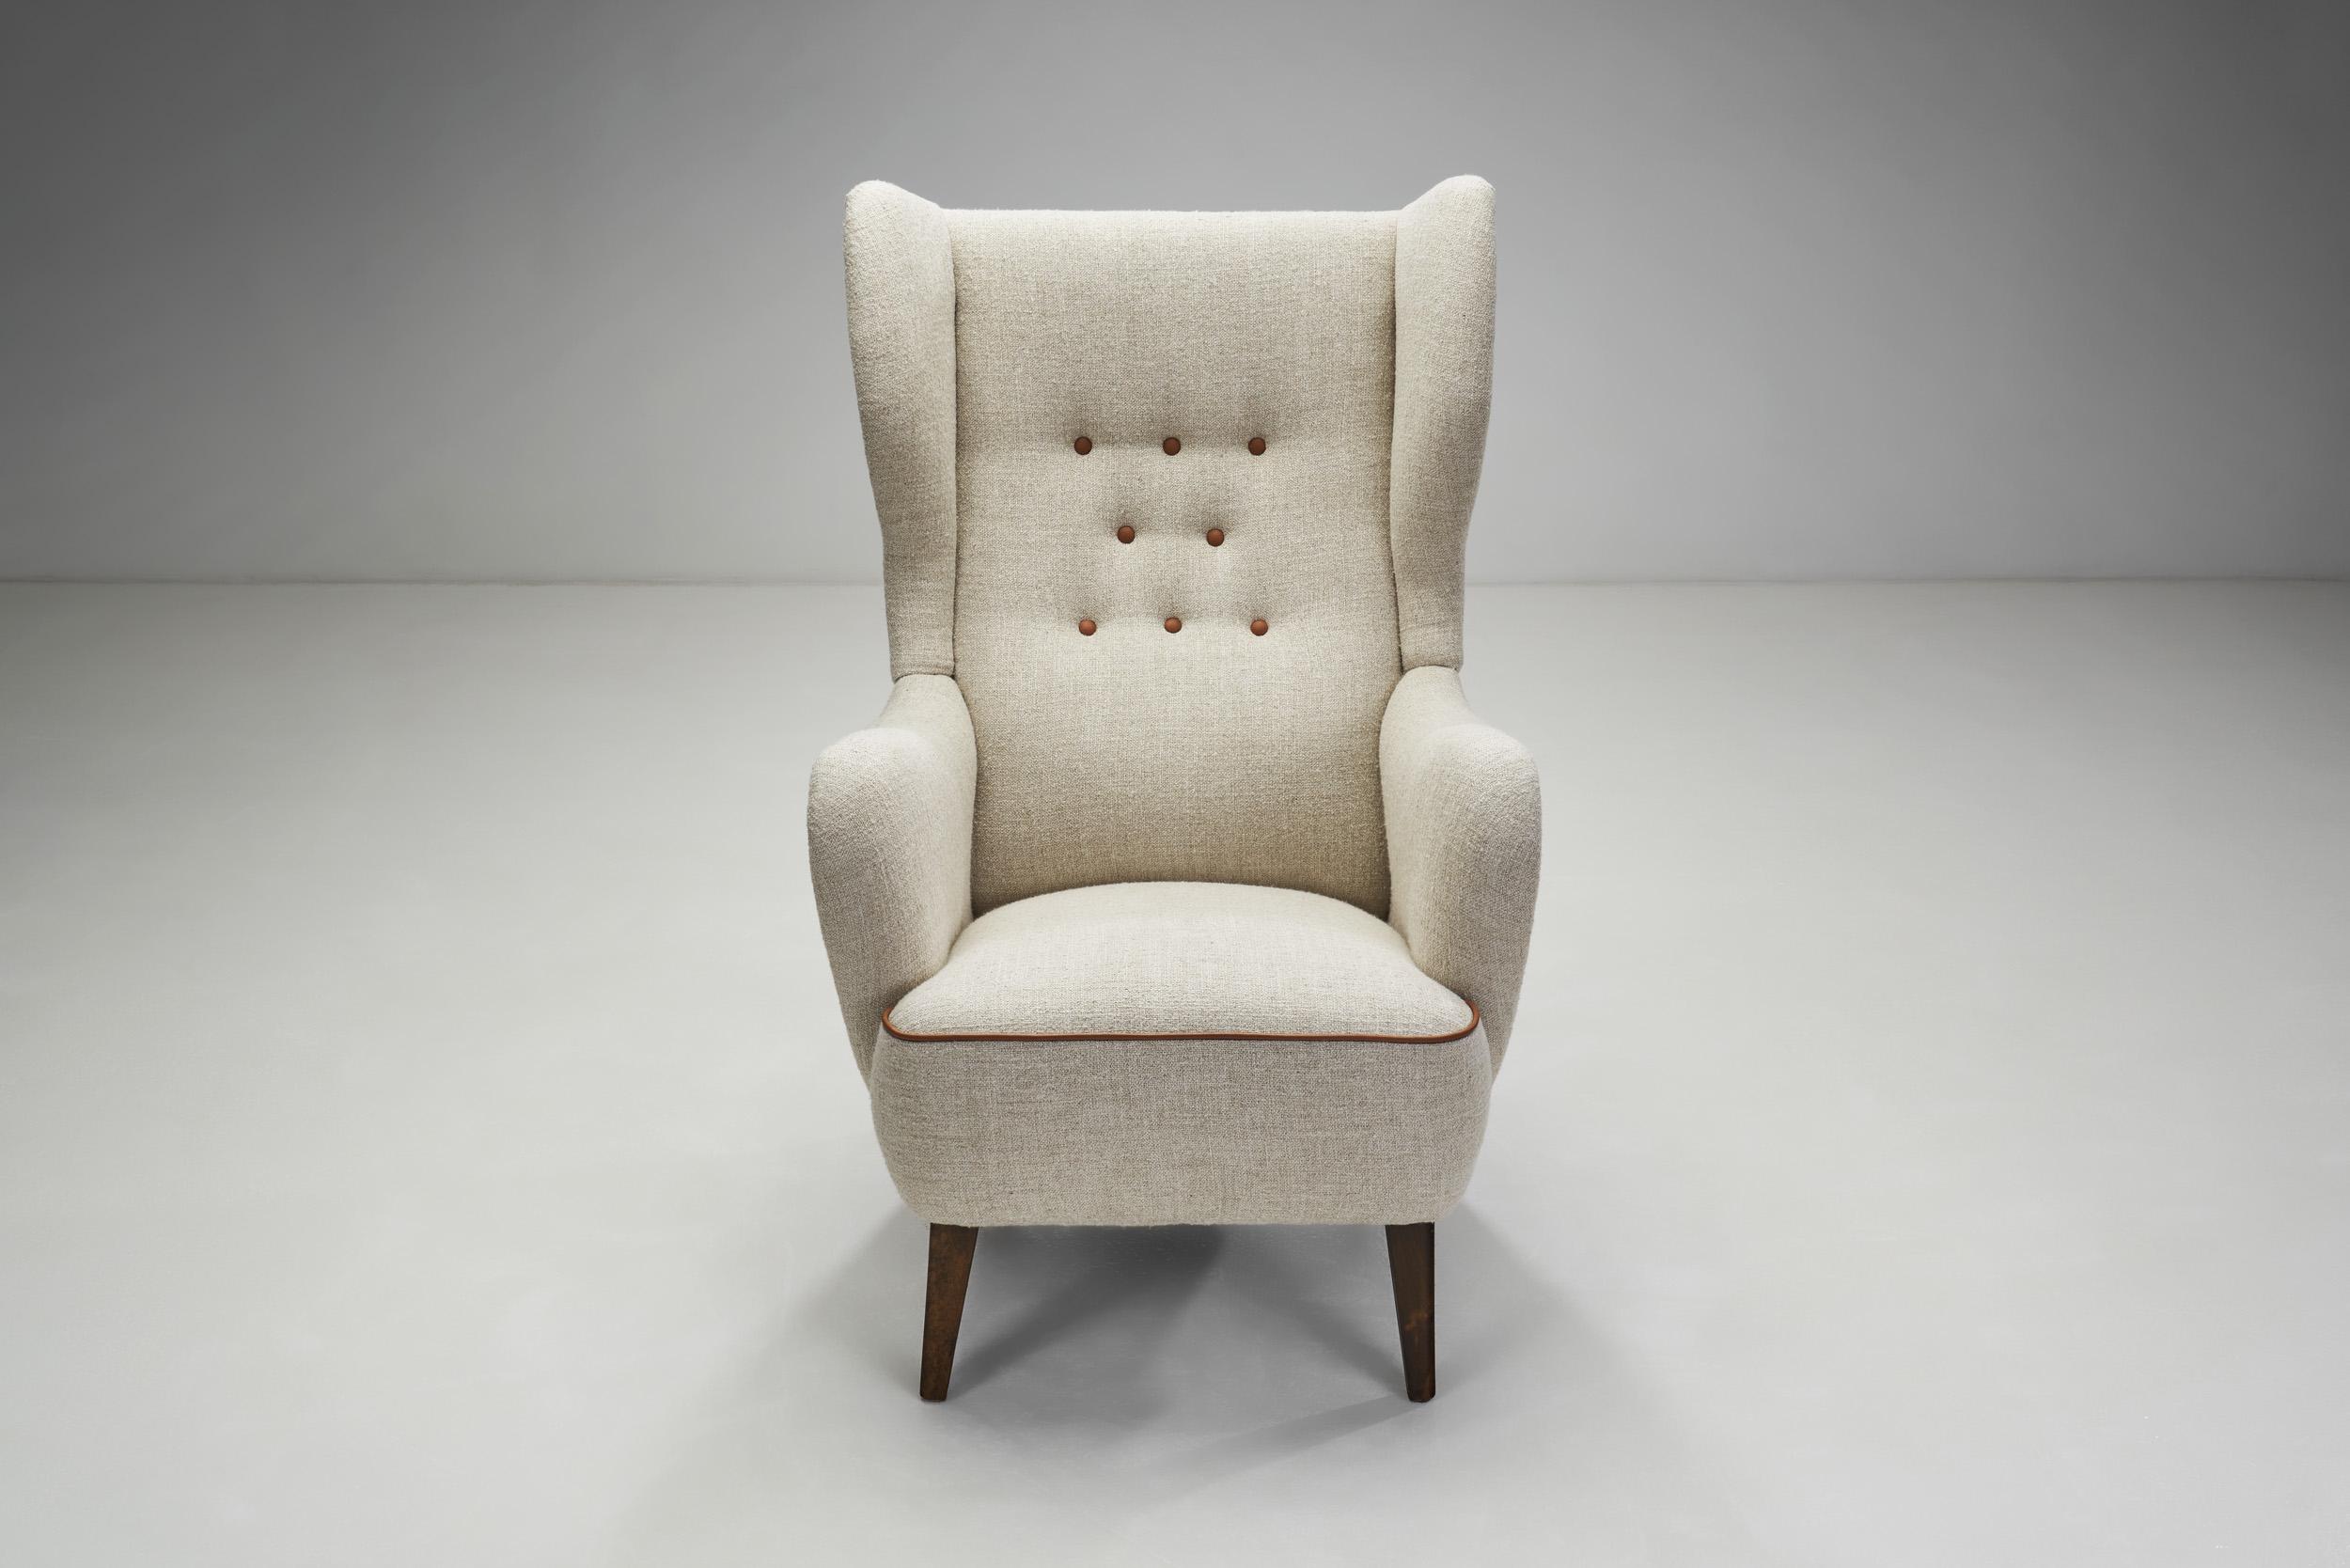 Fabric Danish Cabinetmaker Wing-Back Chair with Stained Beech Legs, Denmark 1940s For Sale